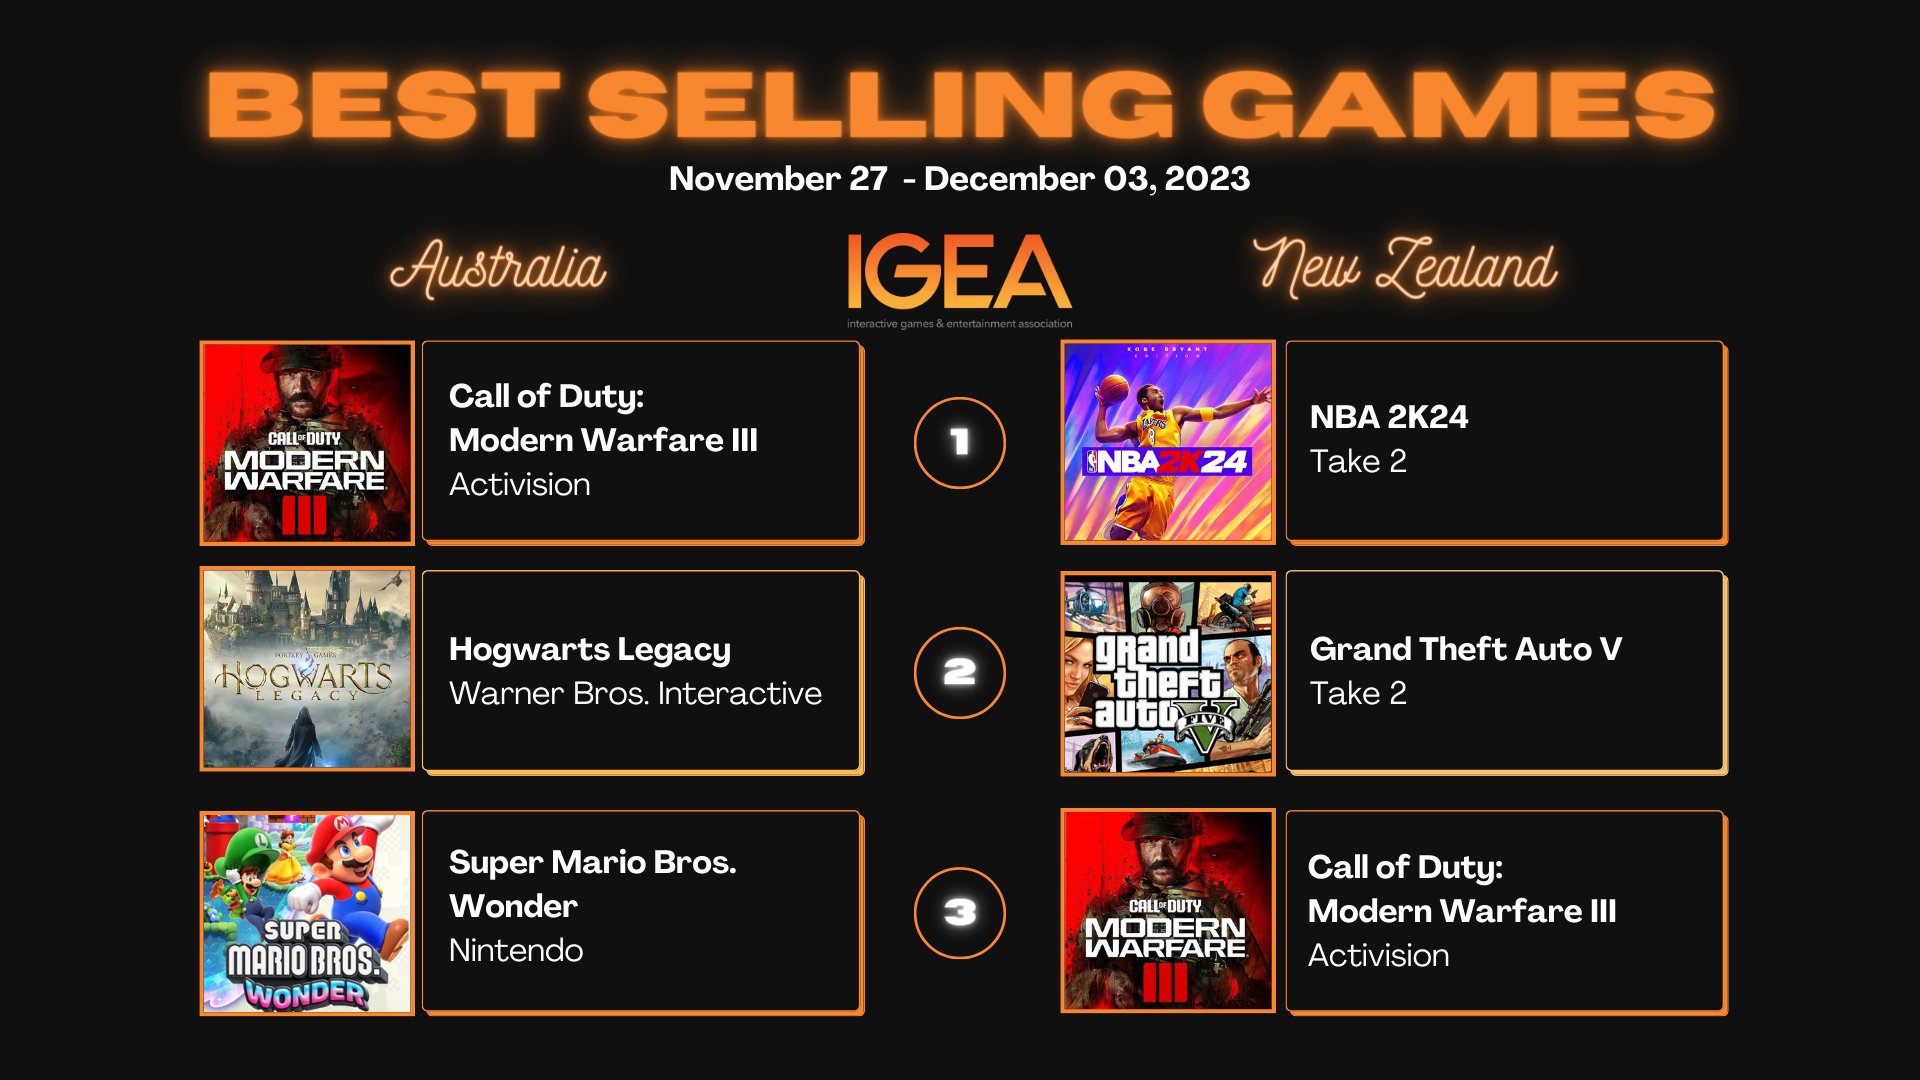 Australians subscribe to video game growth - IGEA